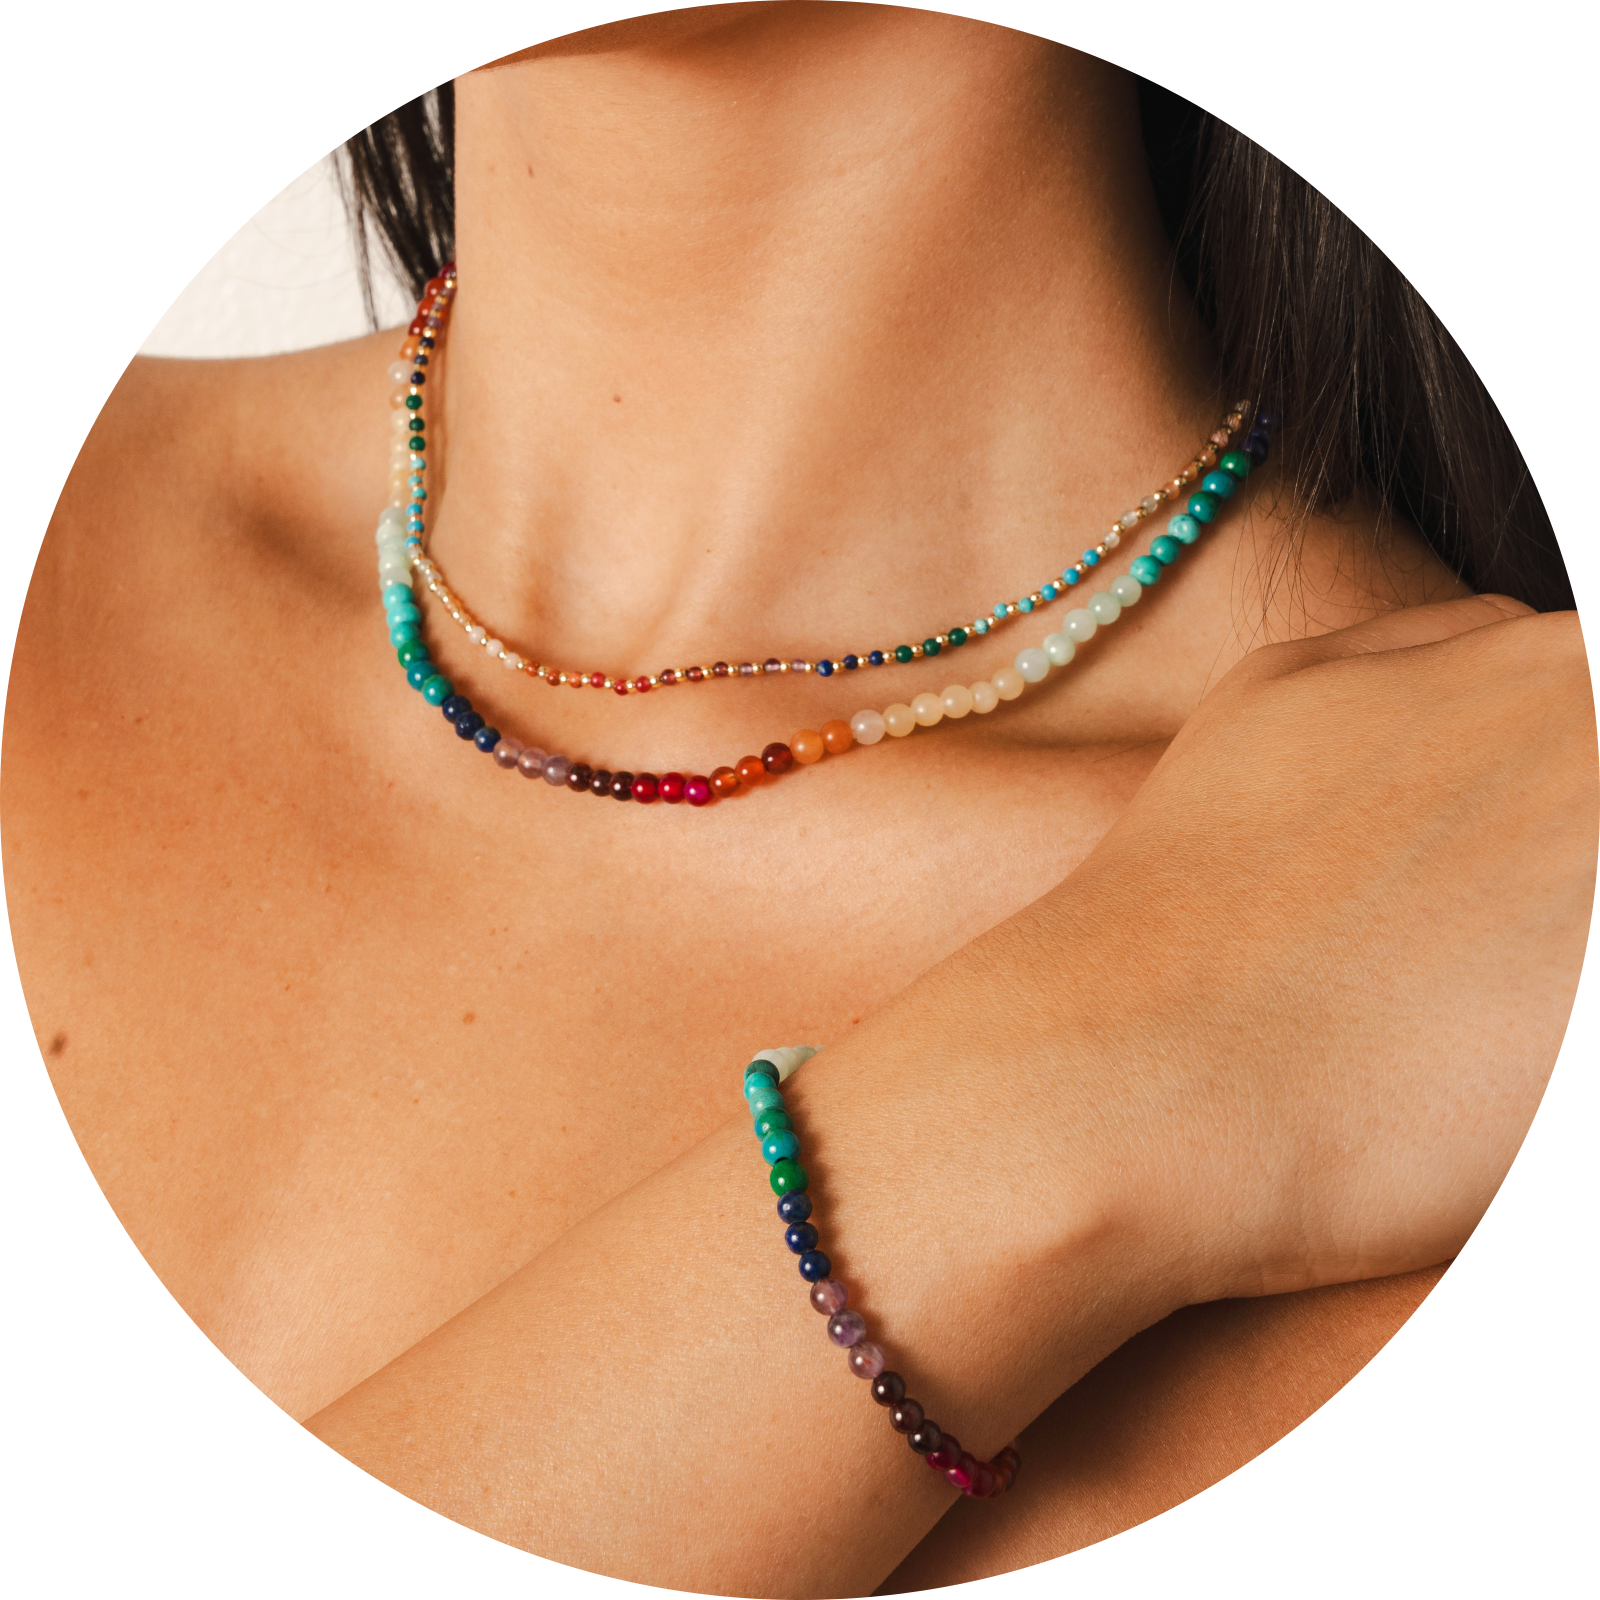 Model wearing two necklaces and a bracelet. The necklaces include a 4mm multicolor stone healing necklace and a 2mm multicolor stone and gold bead healing necklace. The bracelet is a multicolor stone healing bracelet.